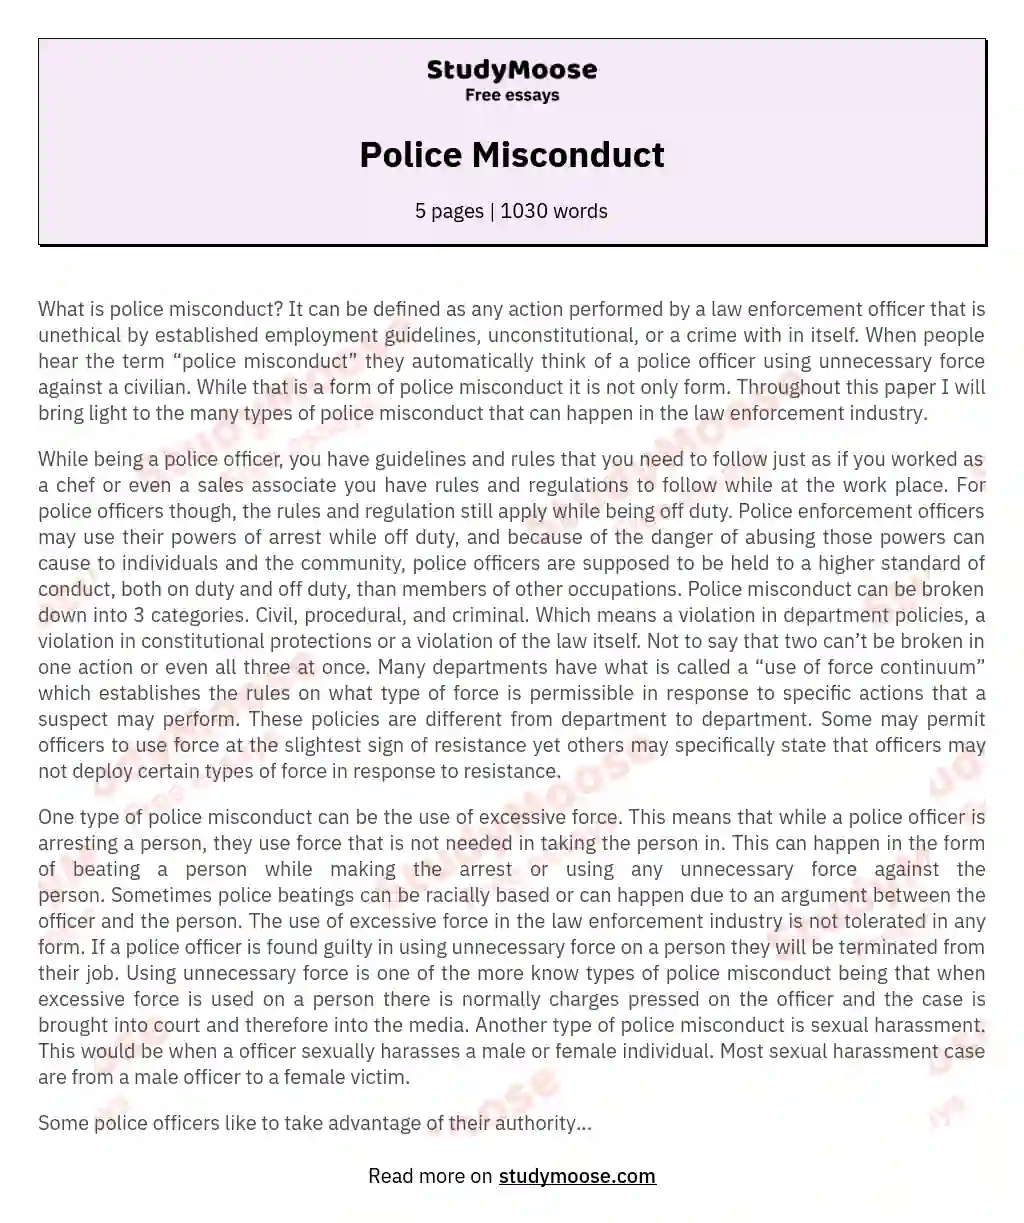 Police Misconduct essay